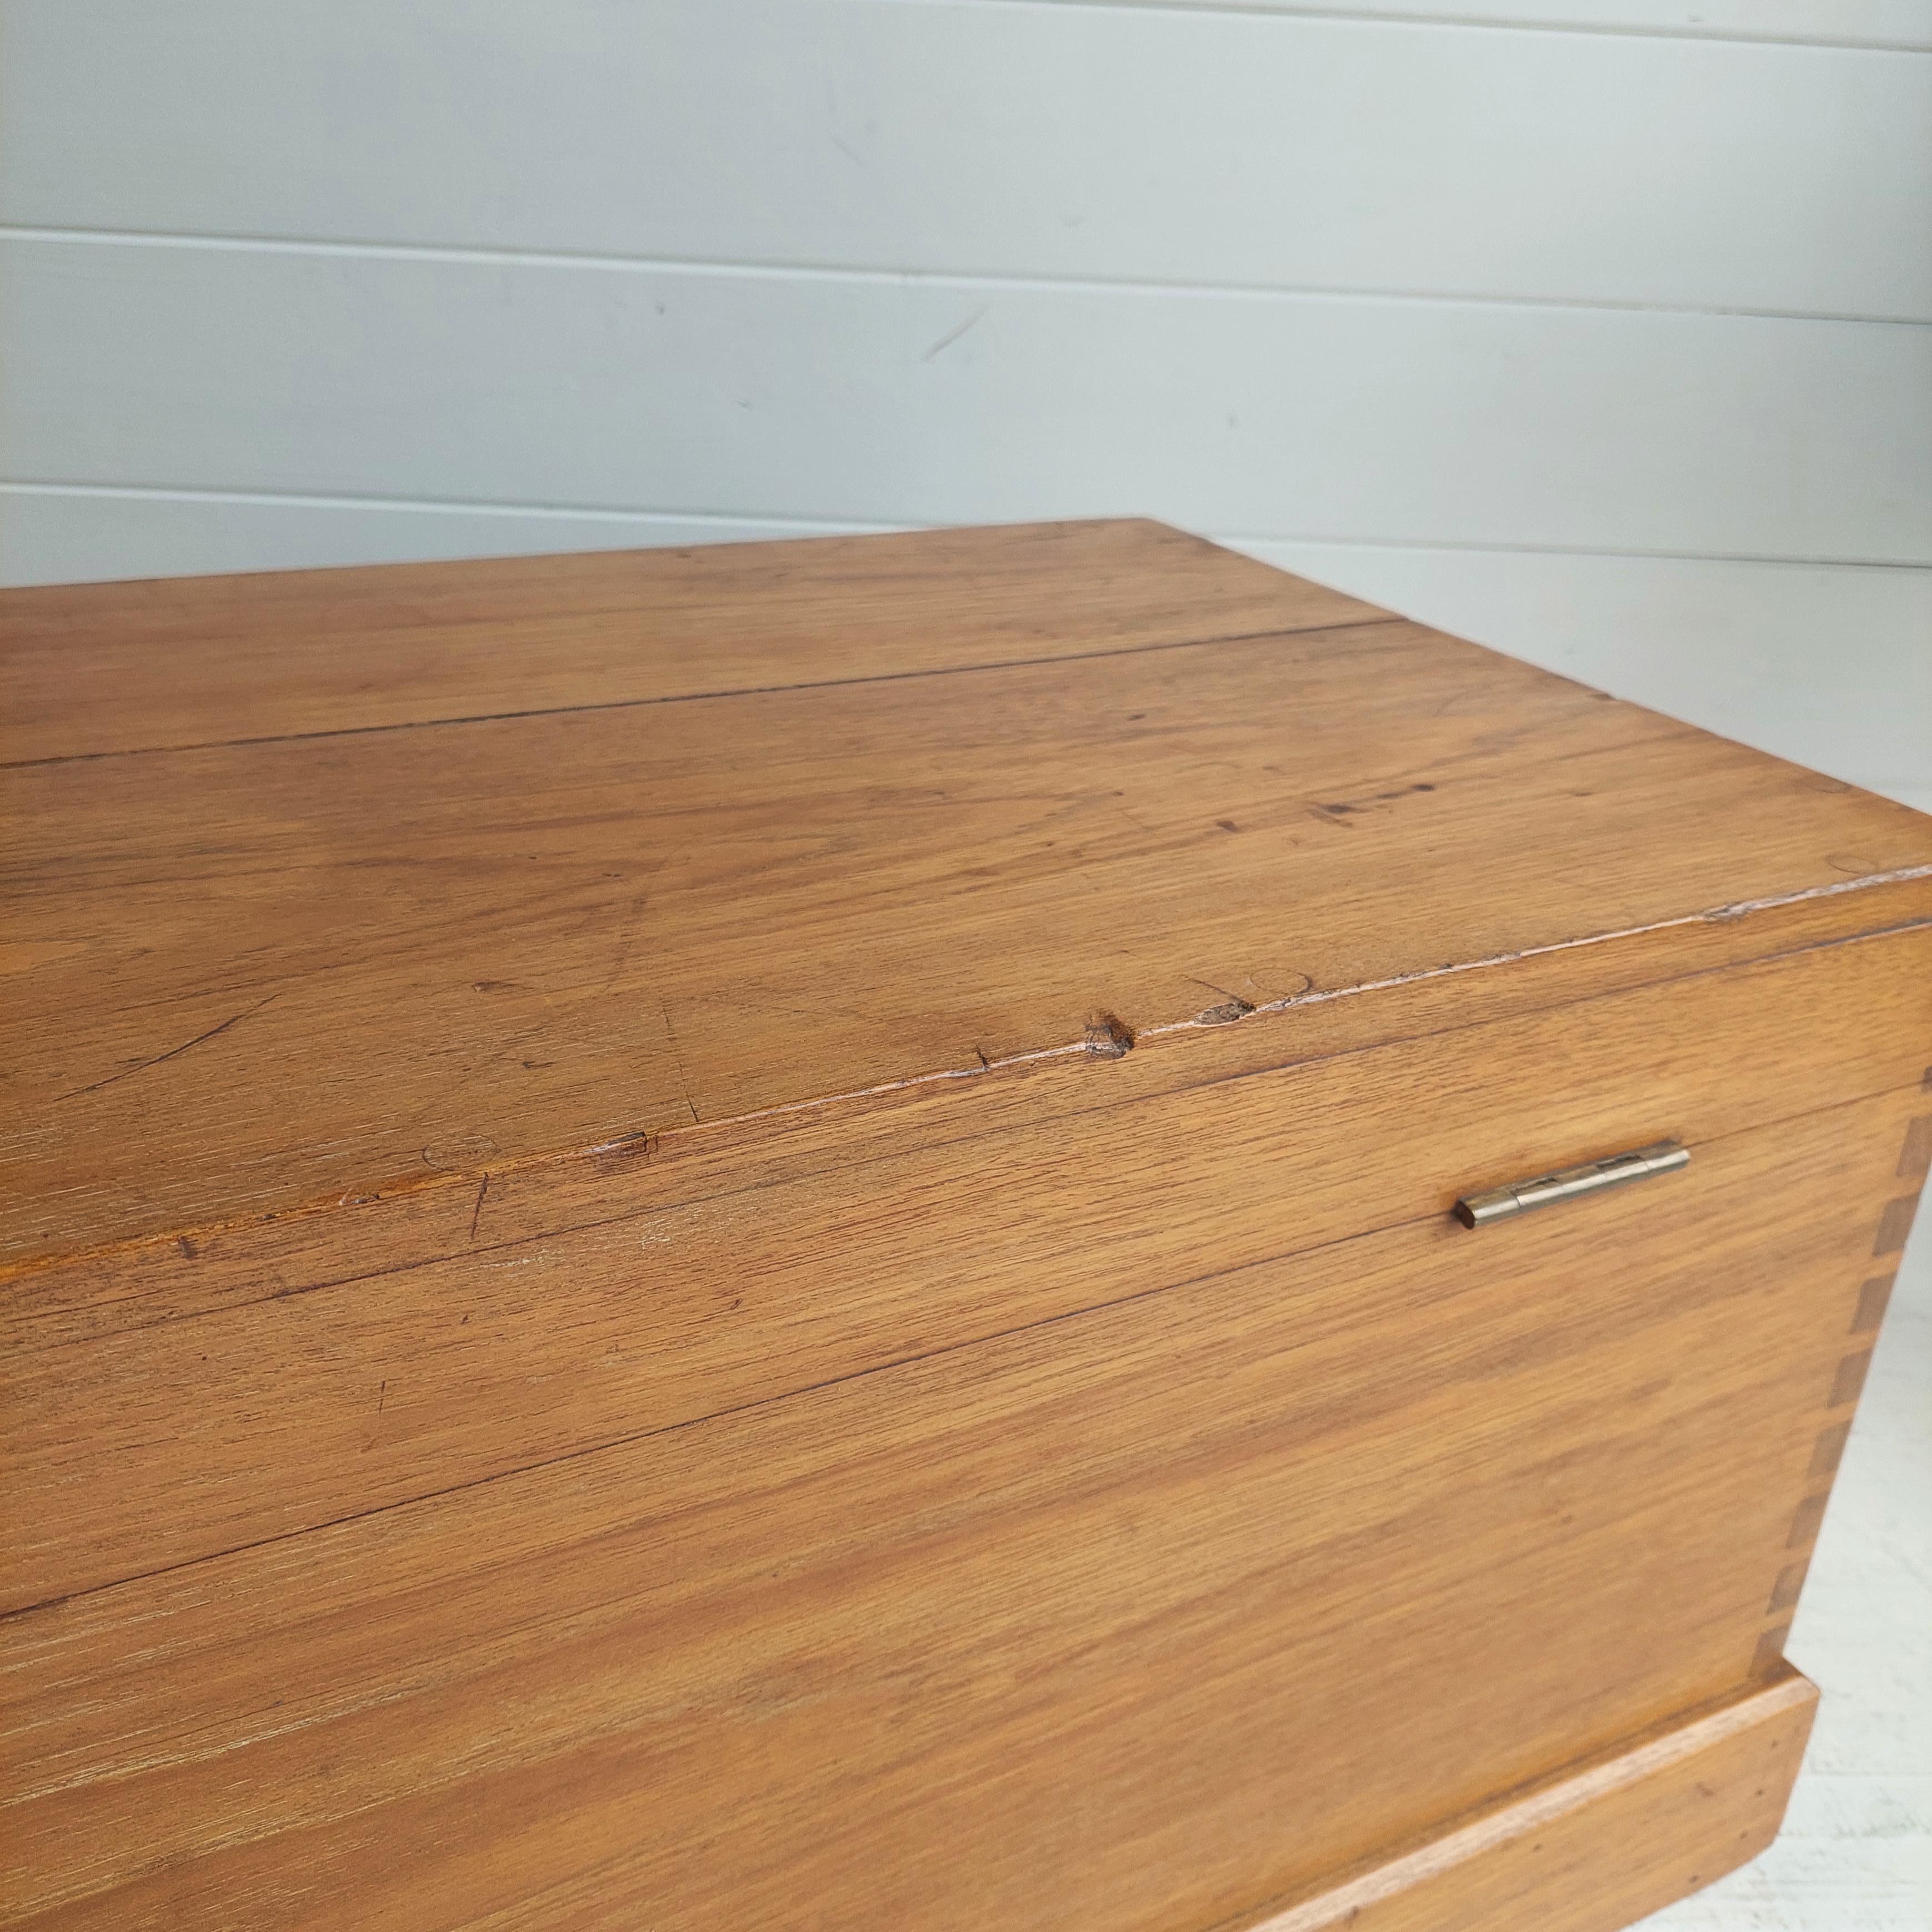 Rustic Antique Camphor Wood Trunk / Chest/ Coffee Table /Rustic Box Storage 12